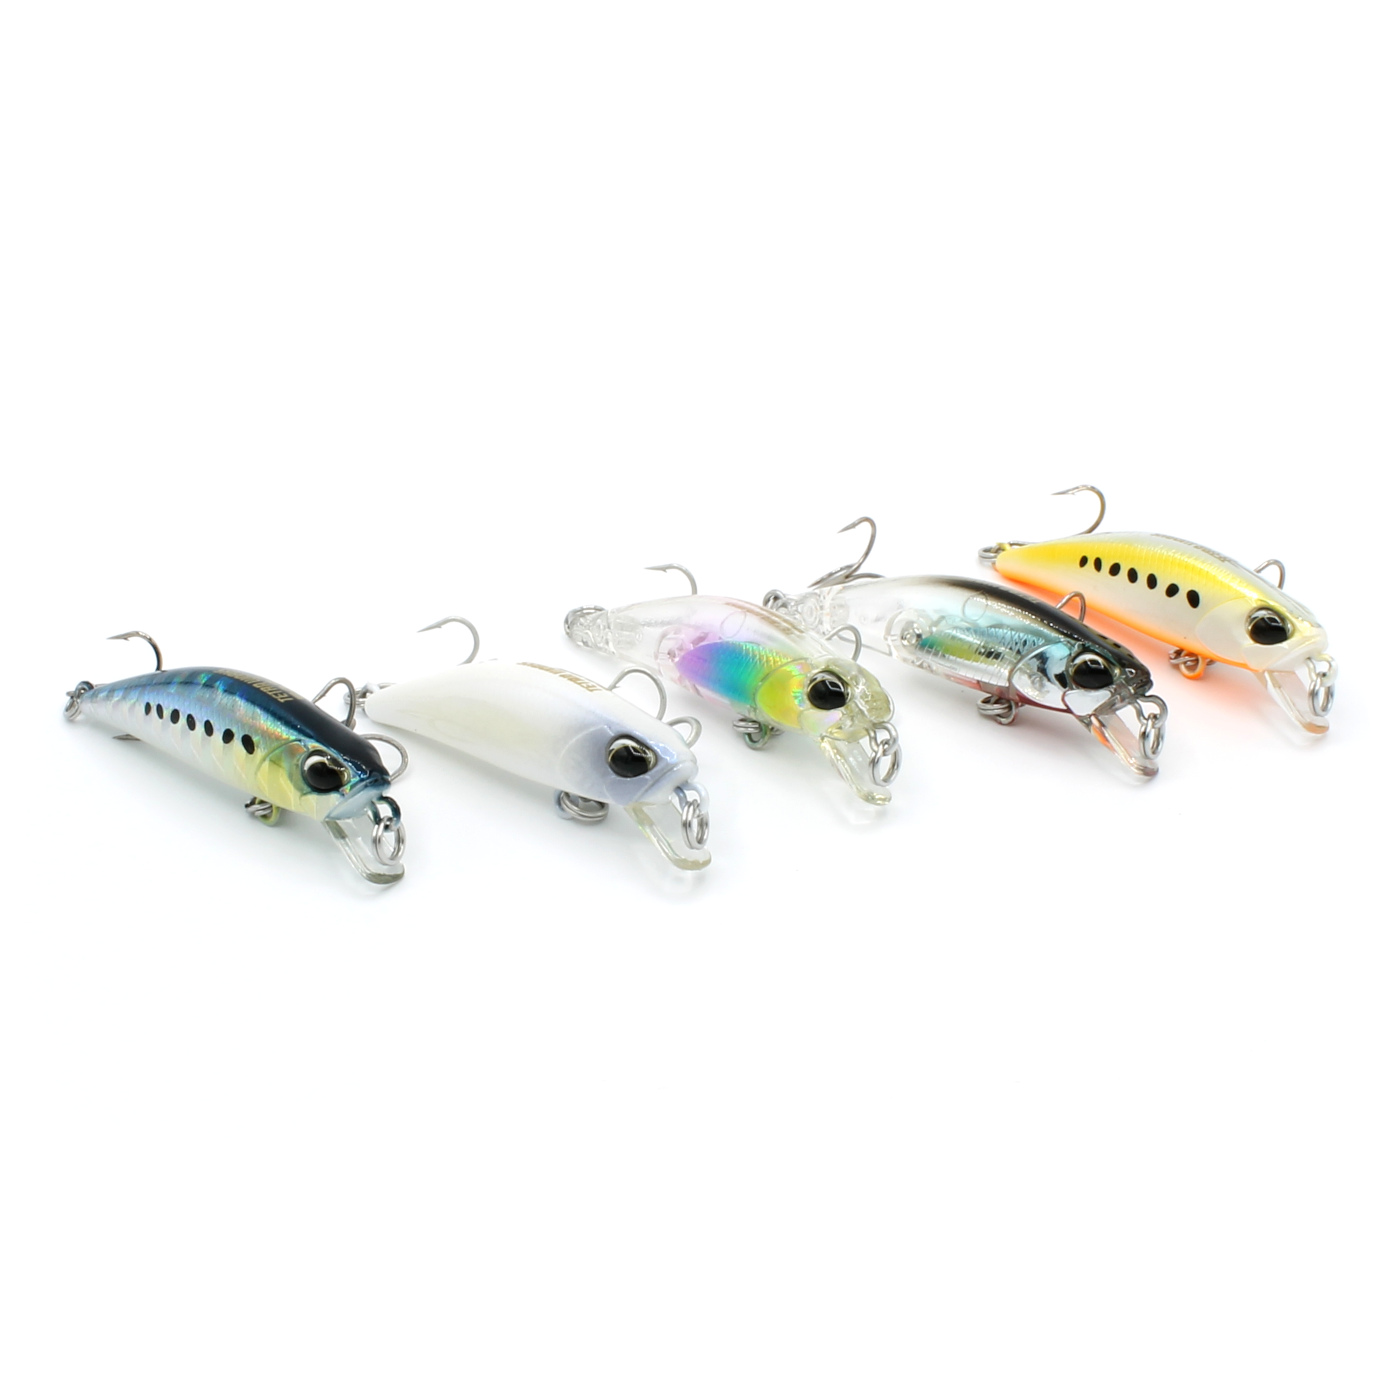 Duo Tetra Works Toto 42 mm Sinking Lure CTA0375 9820 